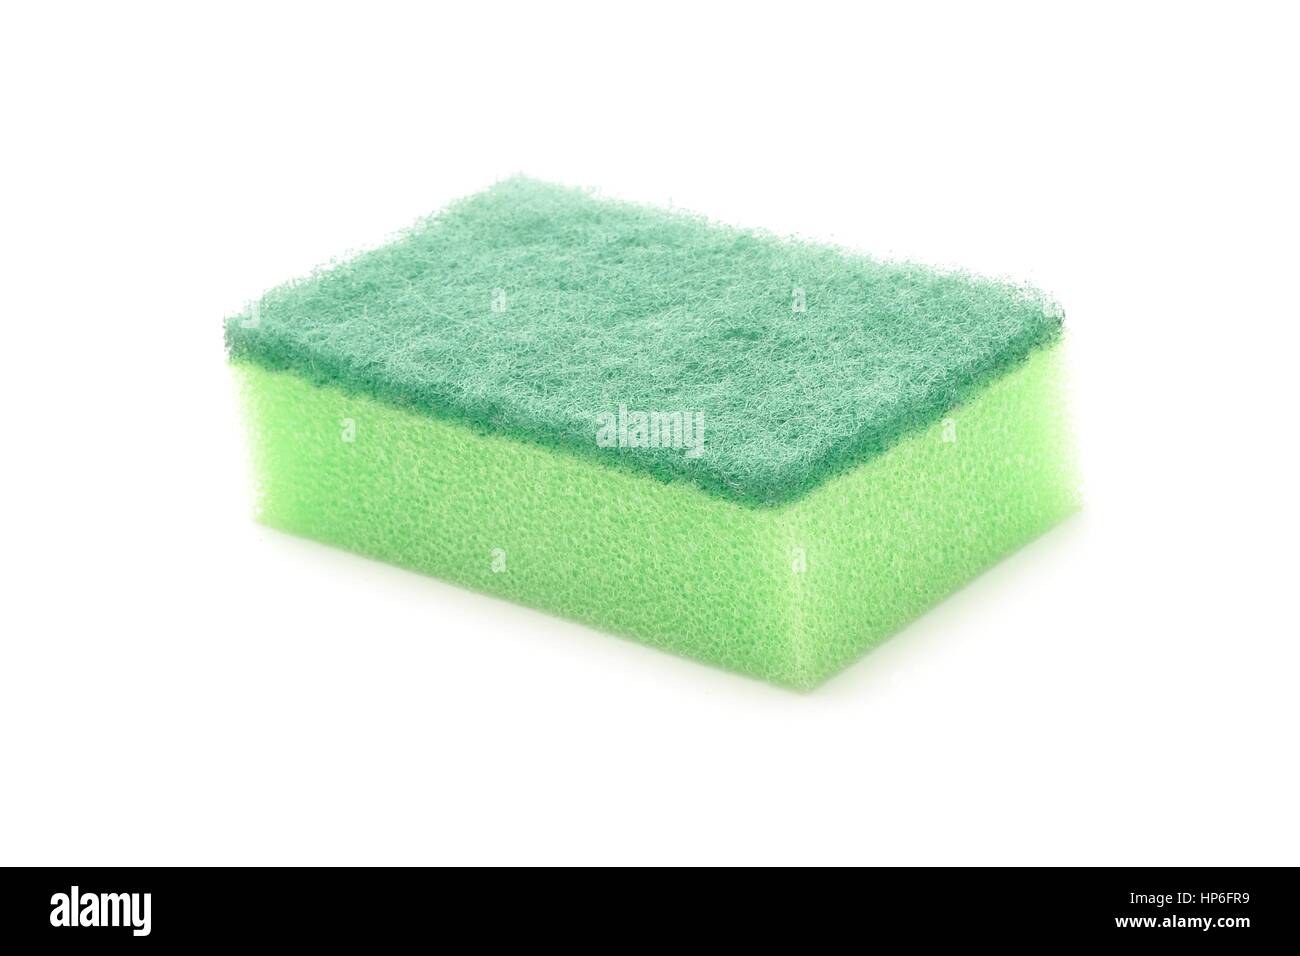 Cleaning sponges. Isolated on white background Stock Photo